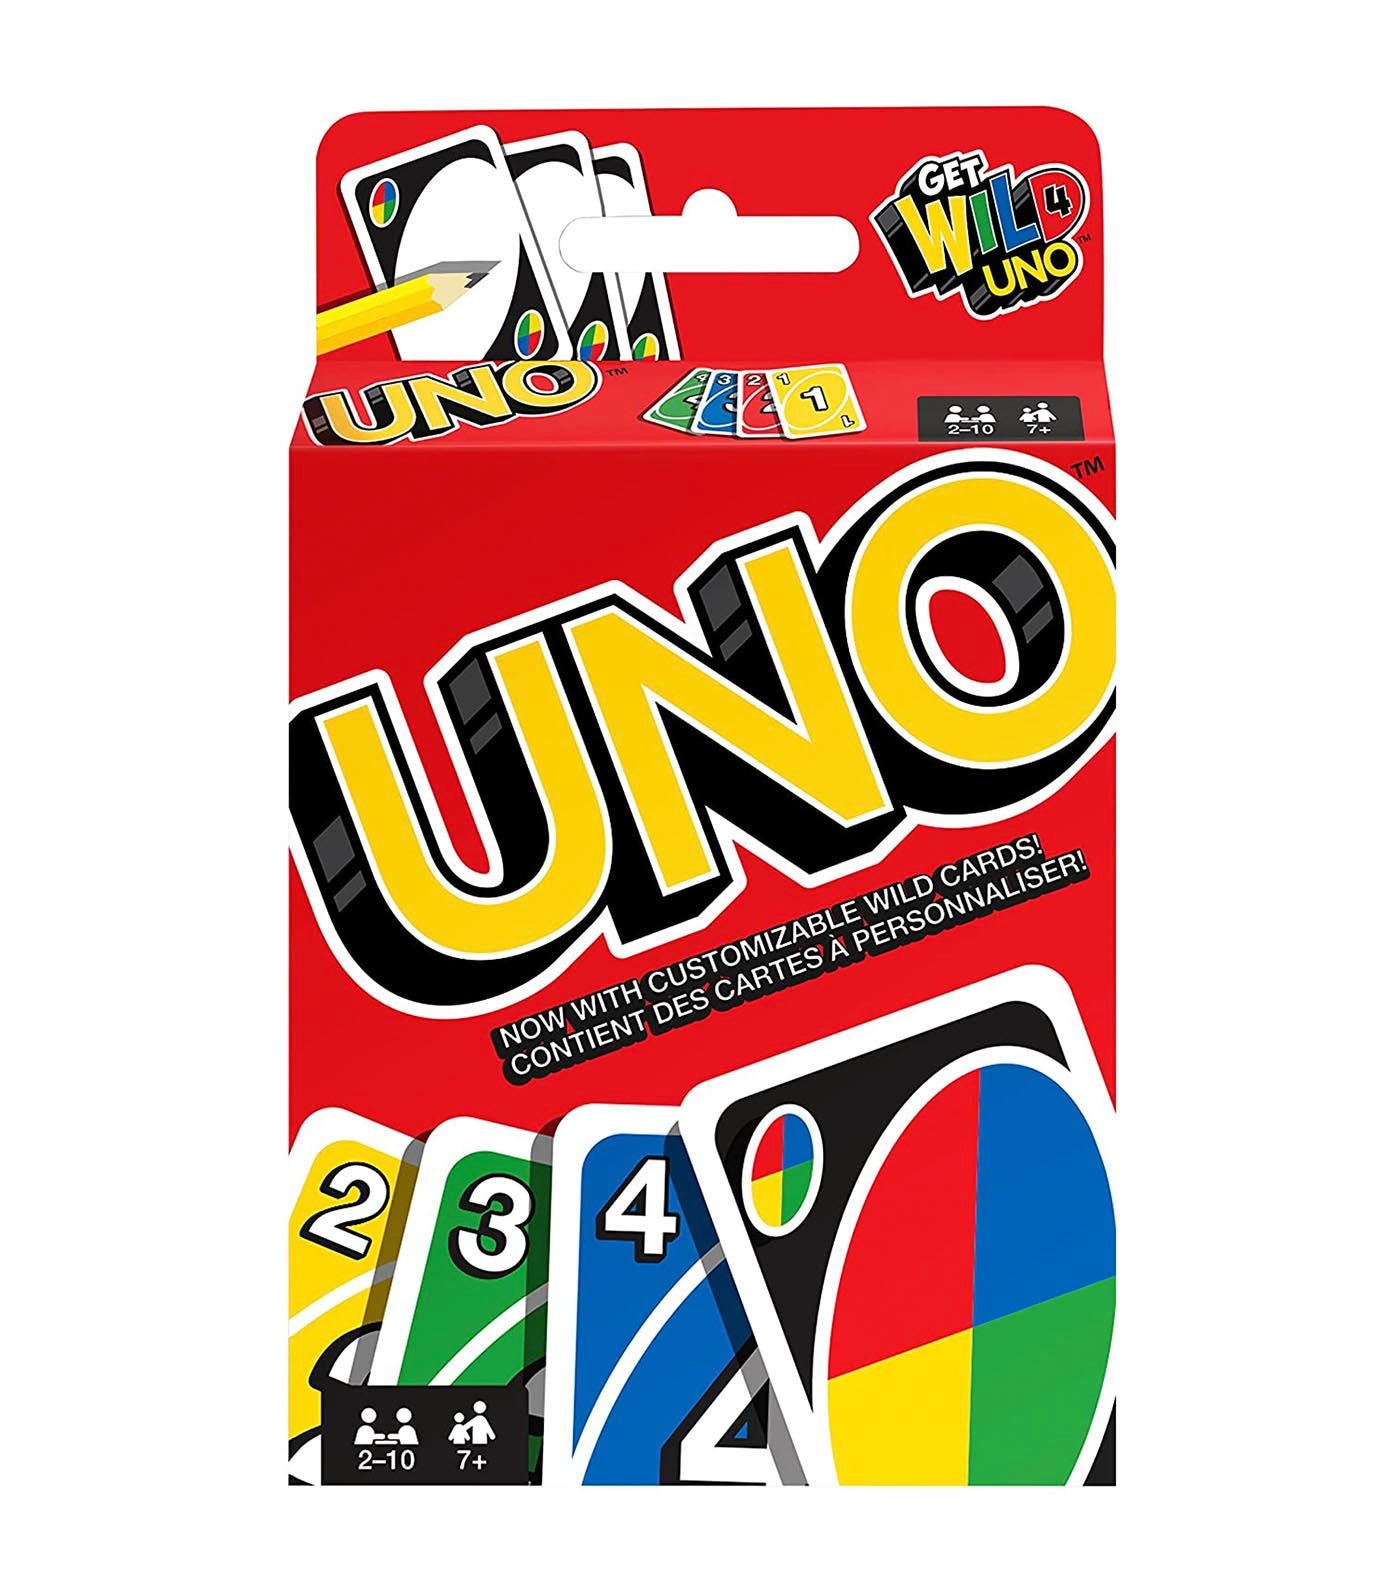 9 to 6 Games - Played a game of Ono 99 by @mattel A fun